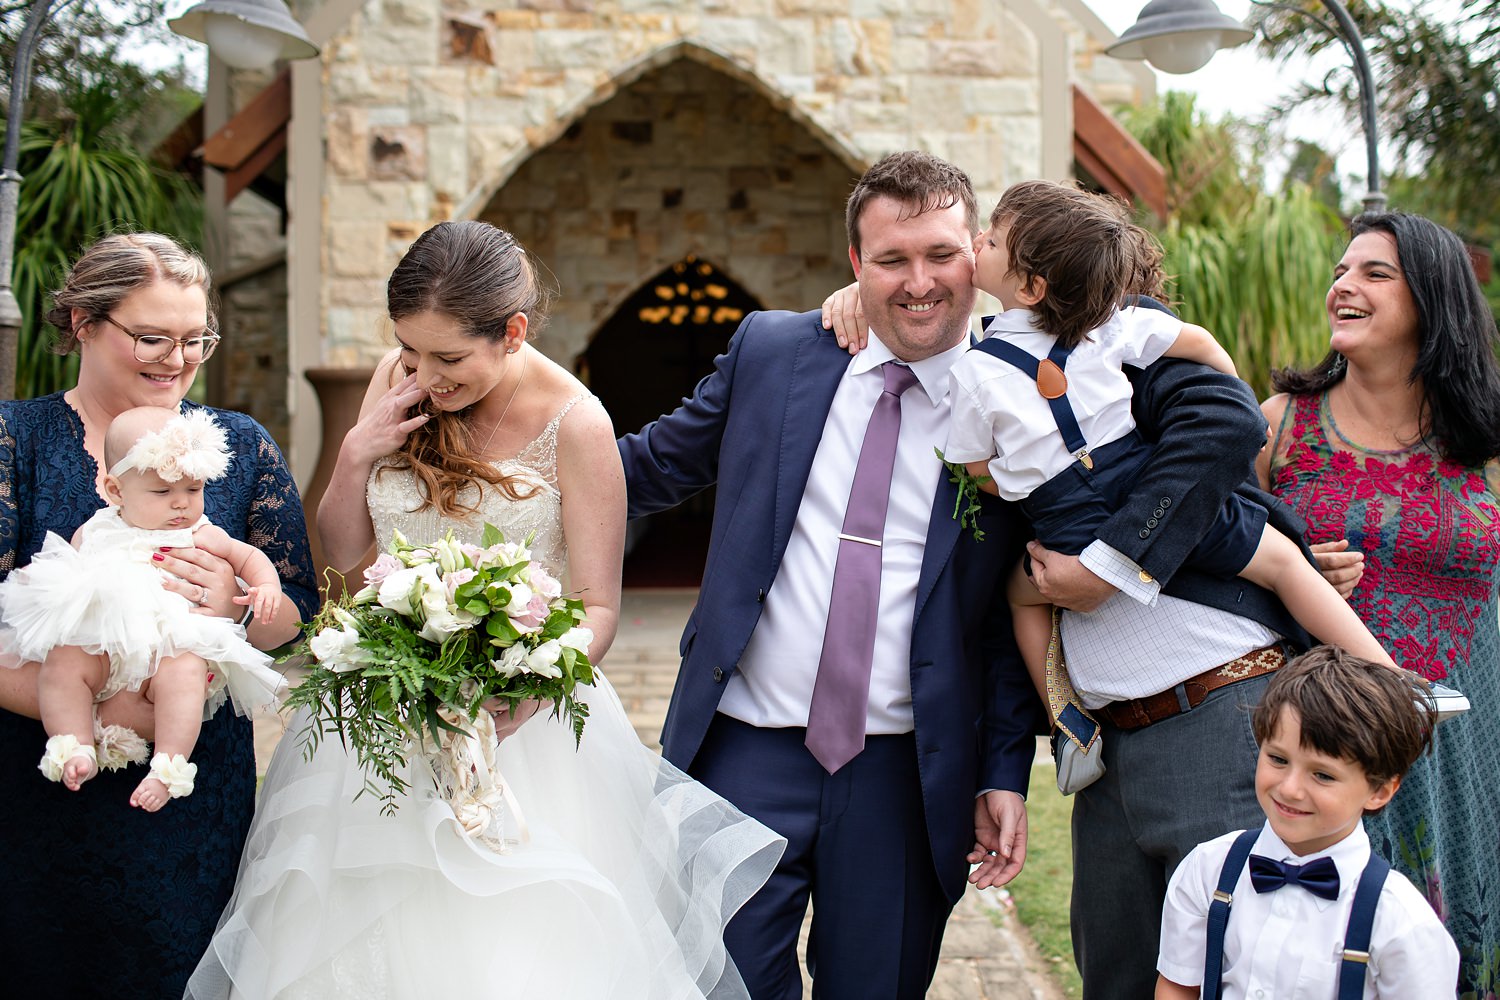 The importance of family photographs at your wedding, and all the moments in between. Real wedding moments by Niki M Photography